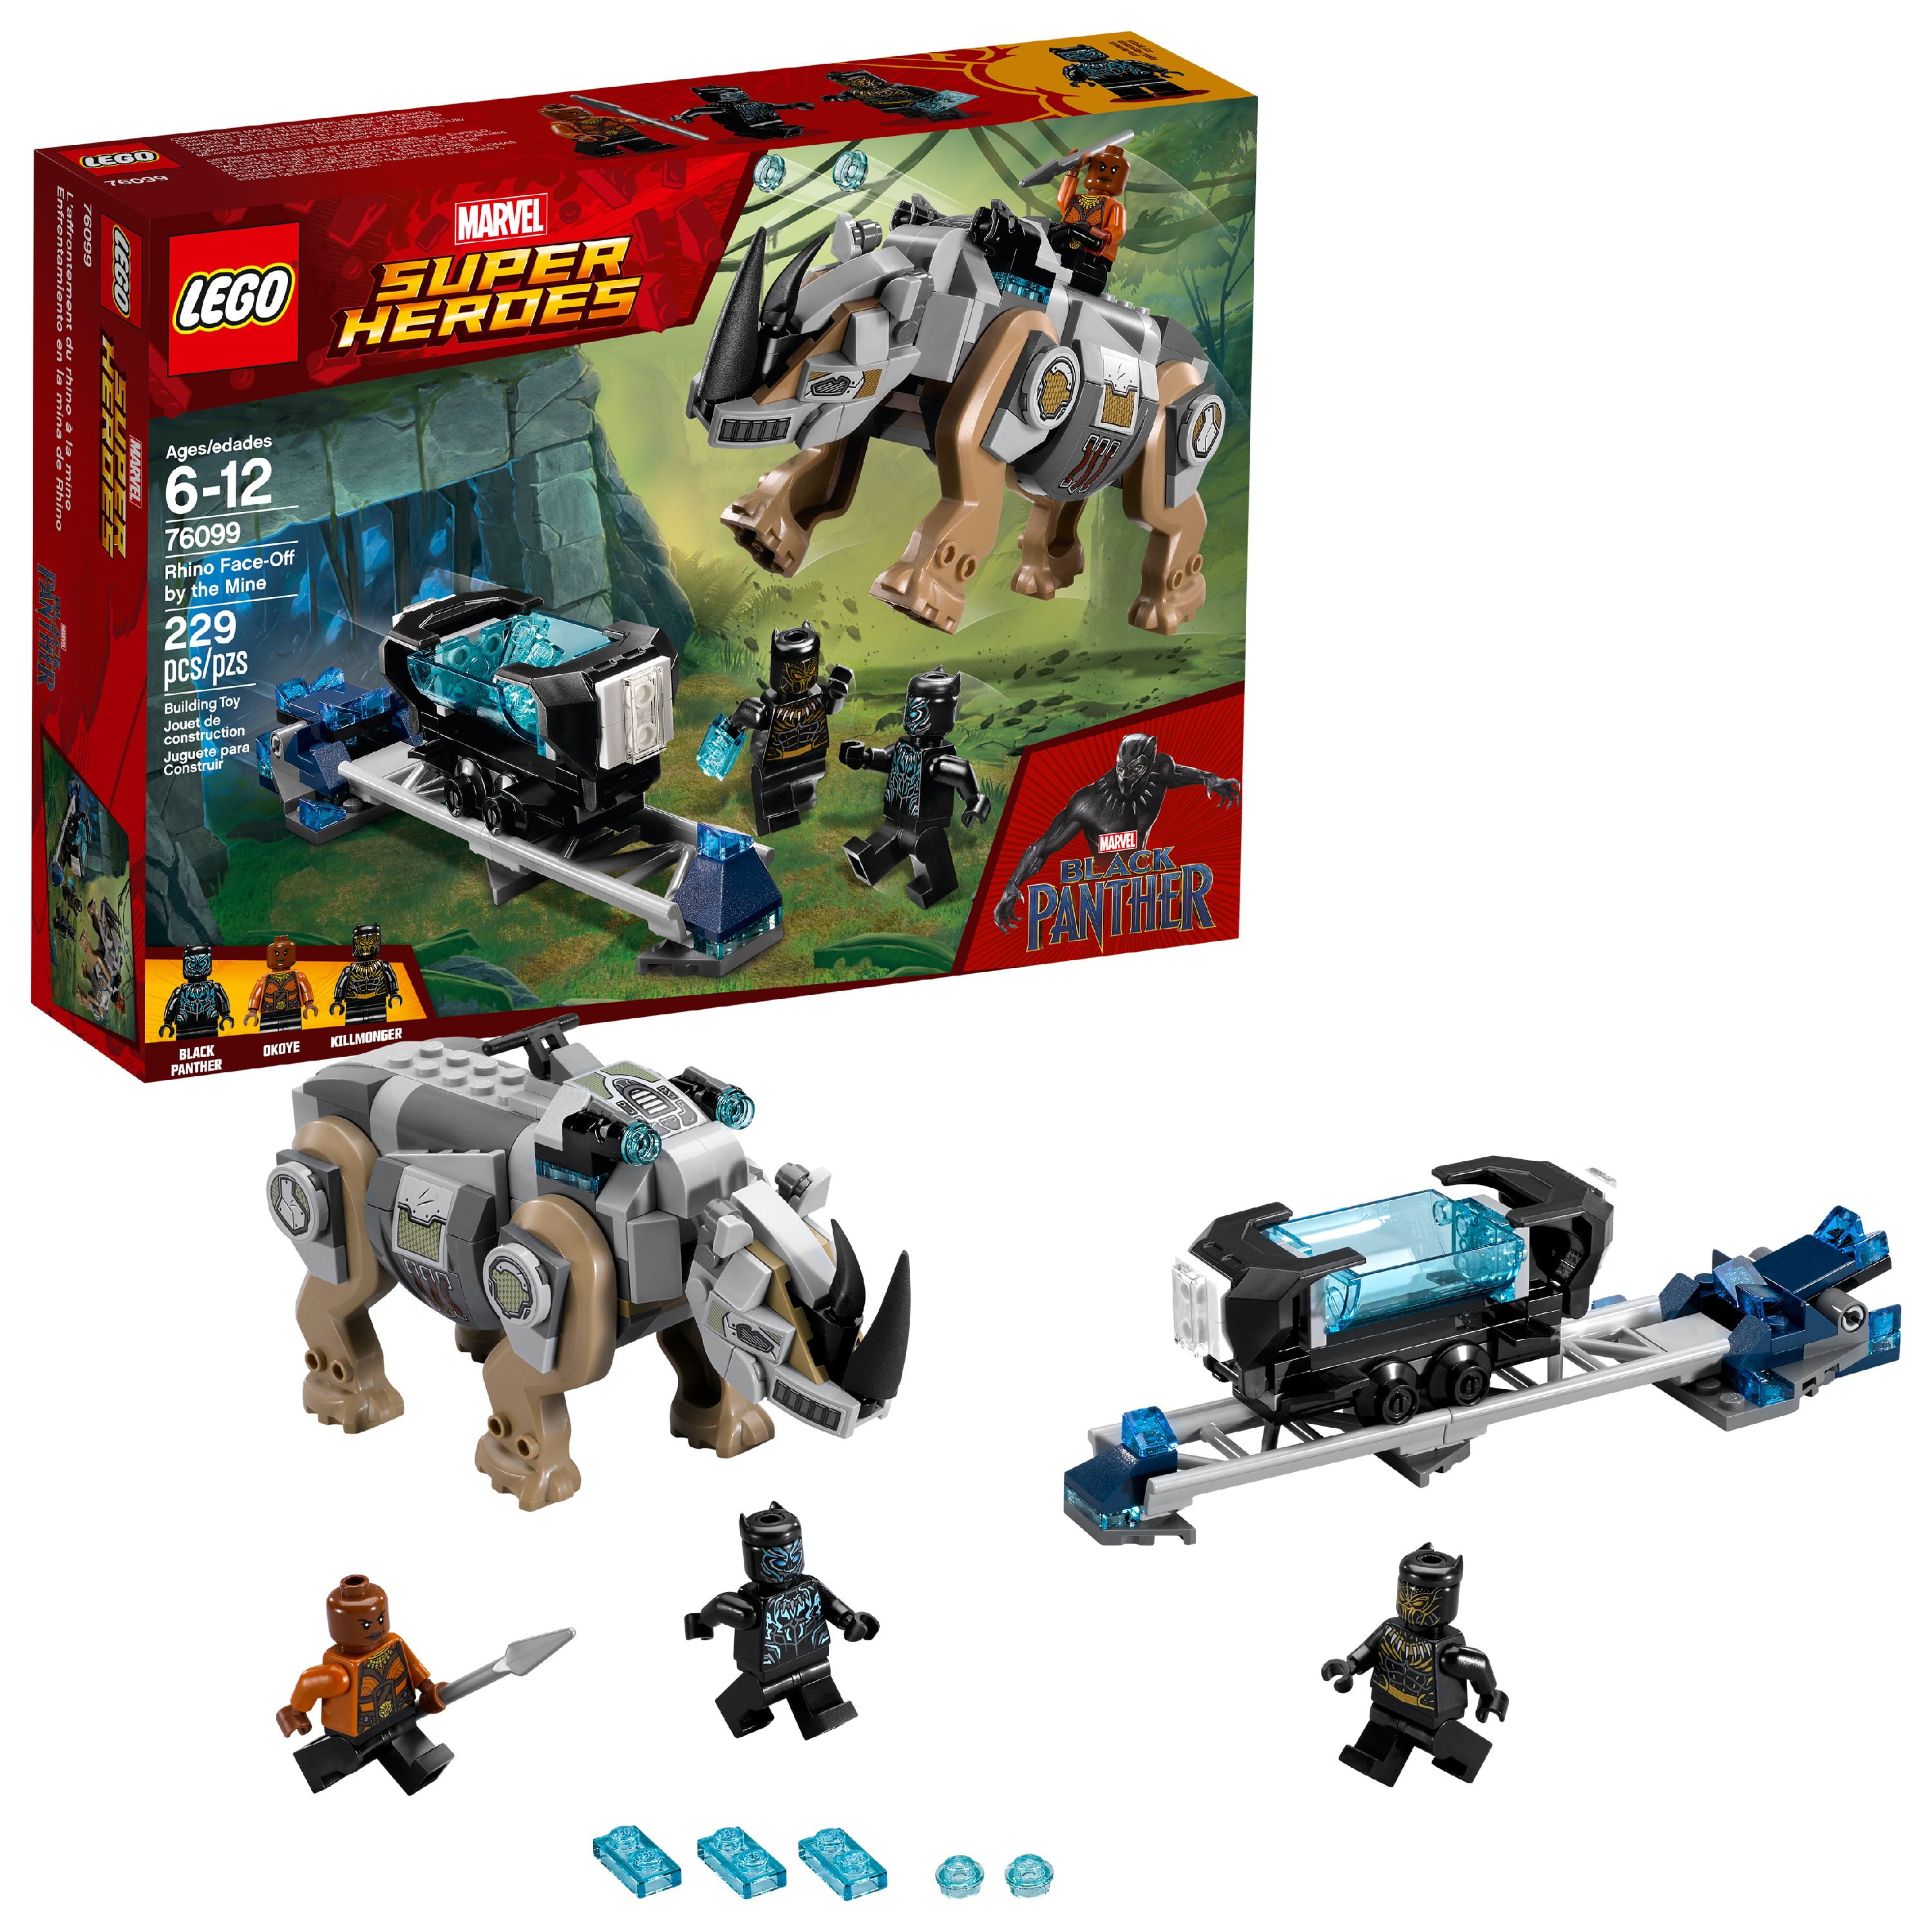 LEGO 76099 Marvel Rhino Face-Off by the Mine 229-piece Building Kit Ages 6-12 